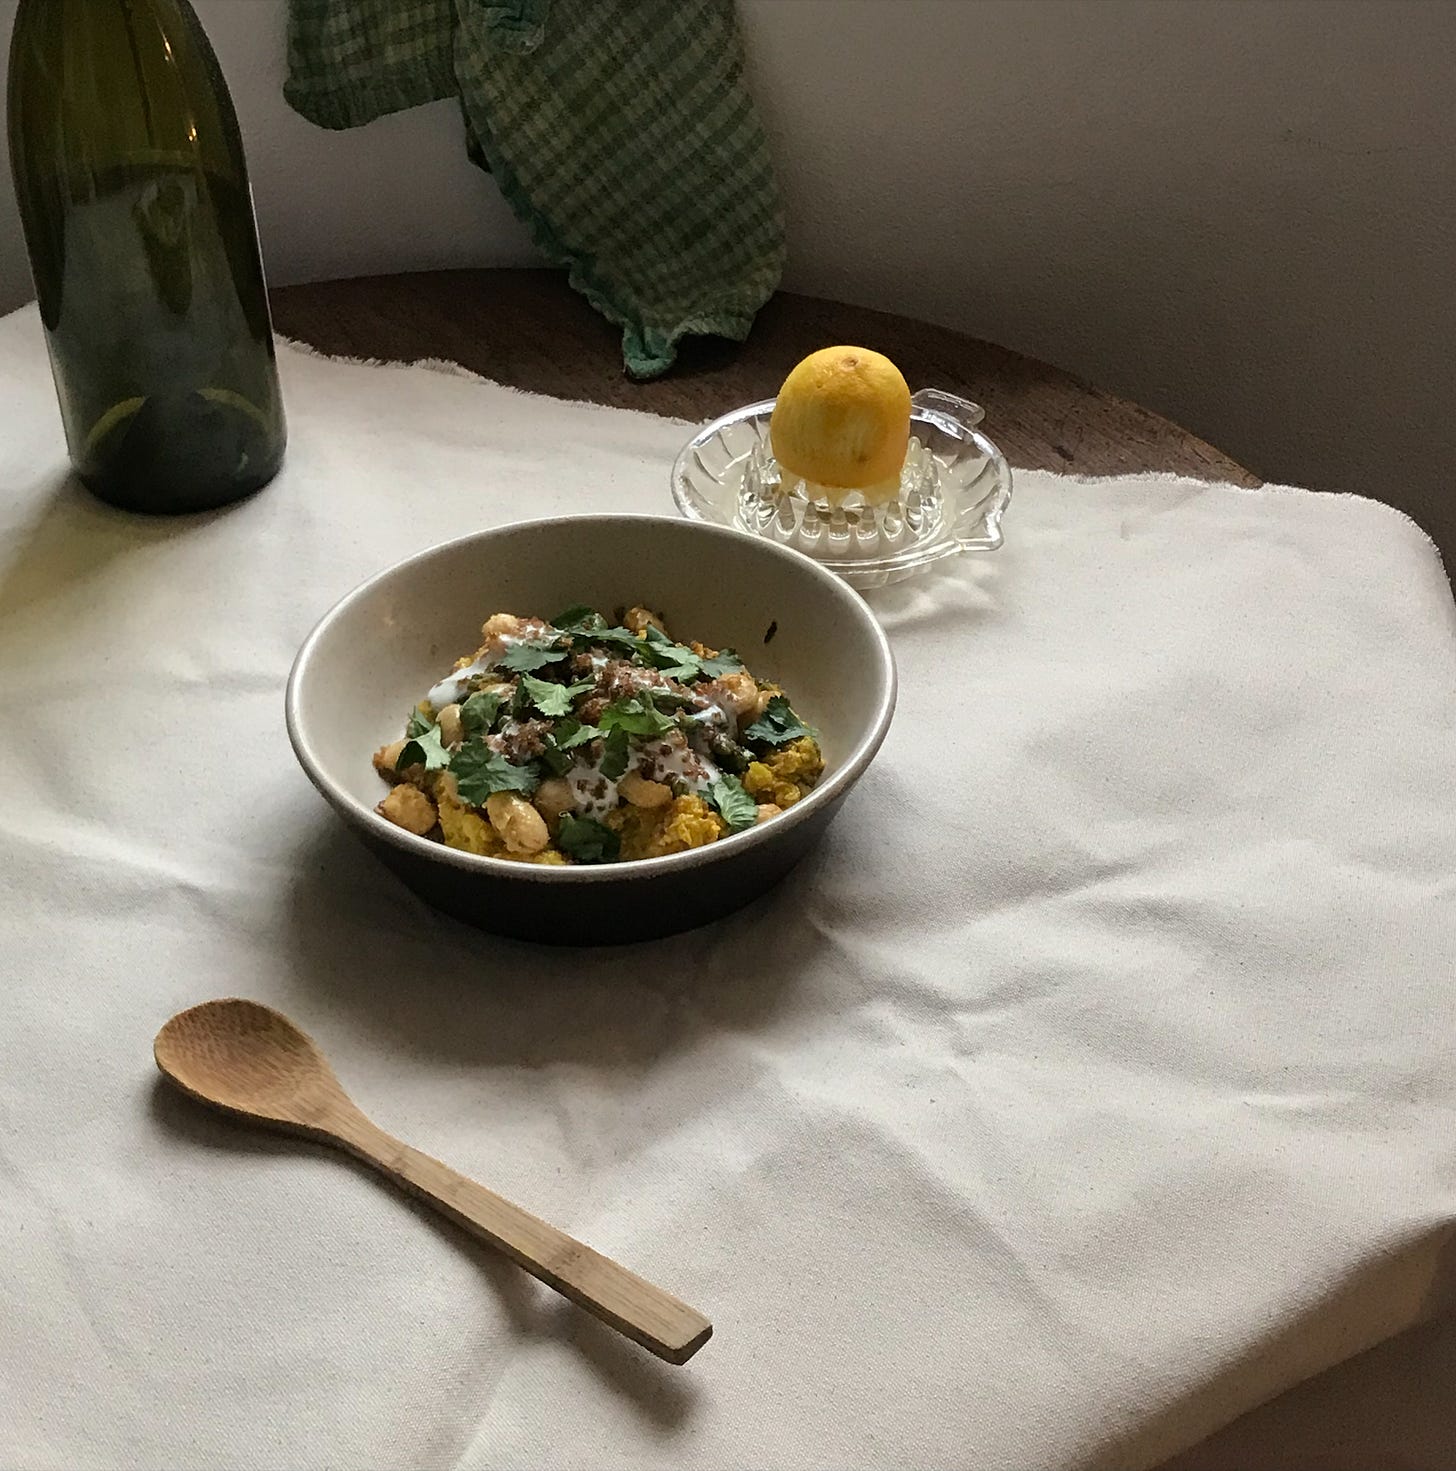 A piece of cream canvas is spread at an angle across a table, with another green fabric hung to the back above it. To the left, a large empty green glass bottle. In the centre, a wide bowl with a mound of yellow butterbeans and green herbs on top, behind which is a glass lemon squeezer with half a lemon atop it. In the foreground, a wooden spoon is placed. 